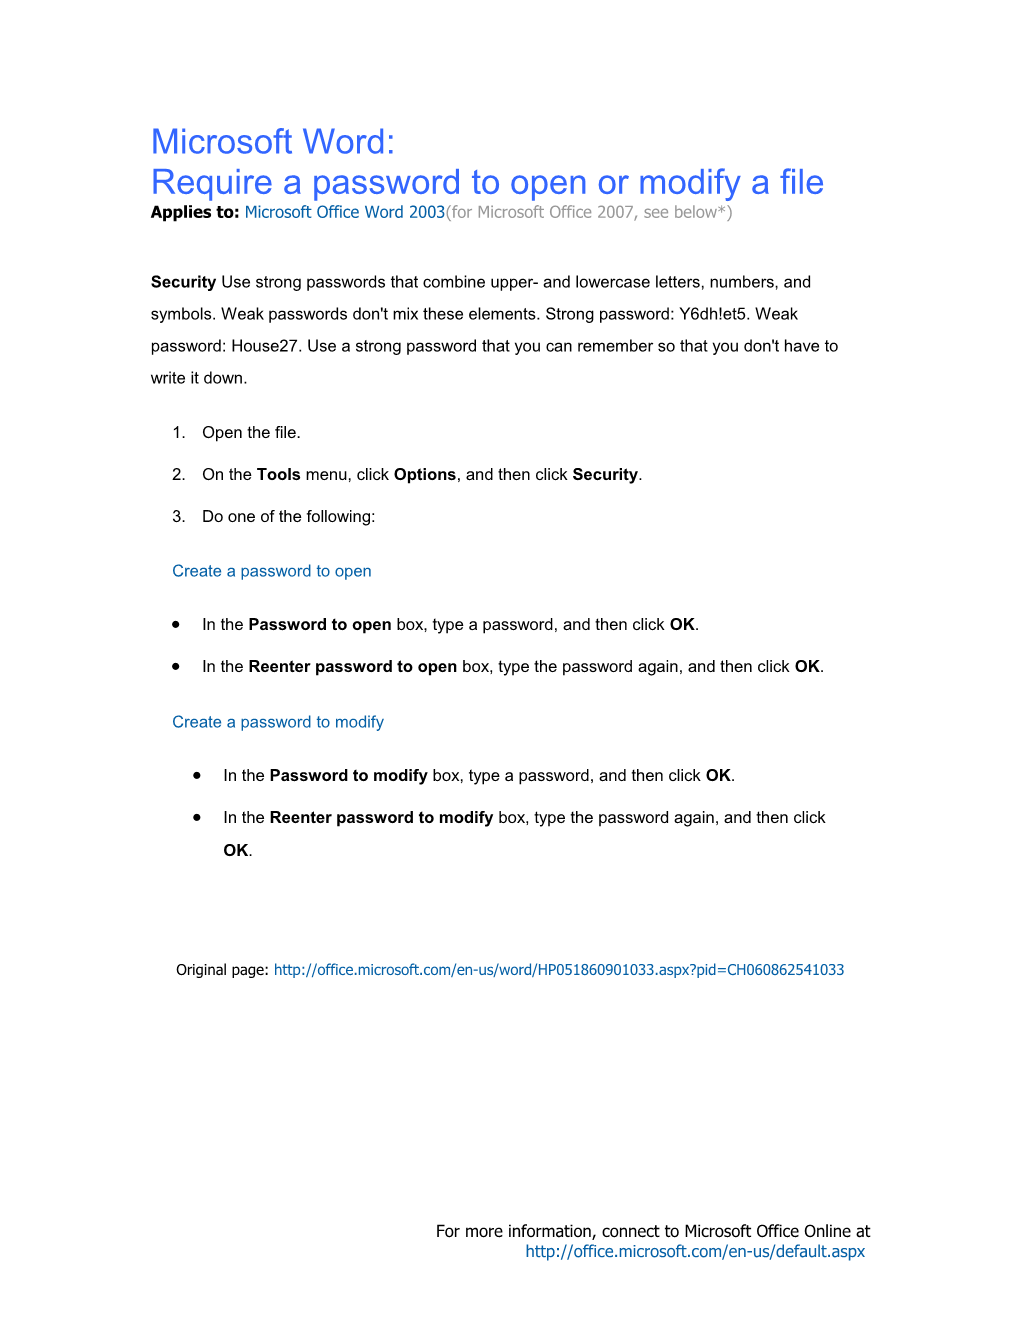 Require a Password to Open Or Modify a File